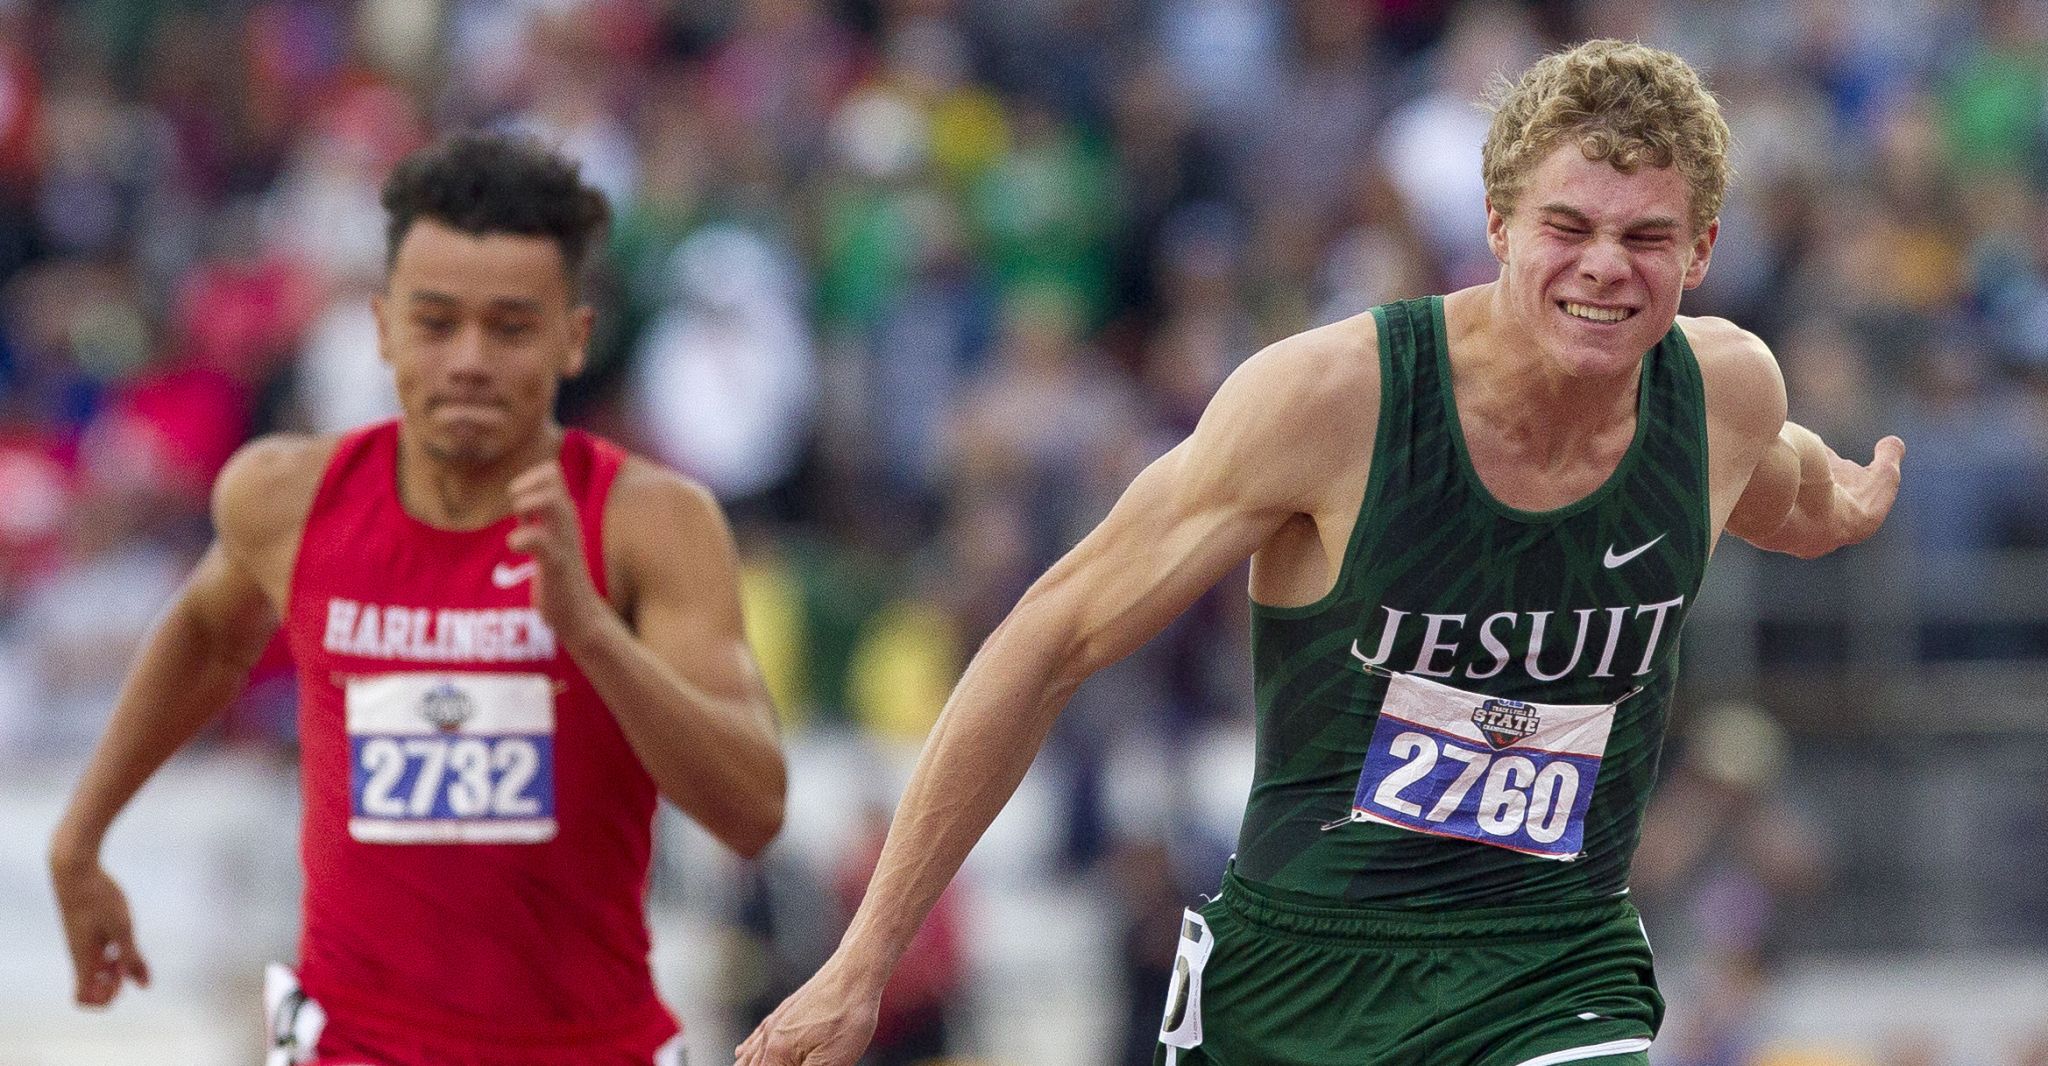 Strake Jesuit's Matthew Boling sets national high school record at state meet ...